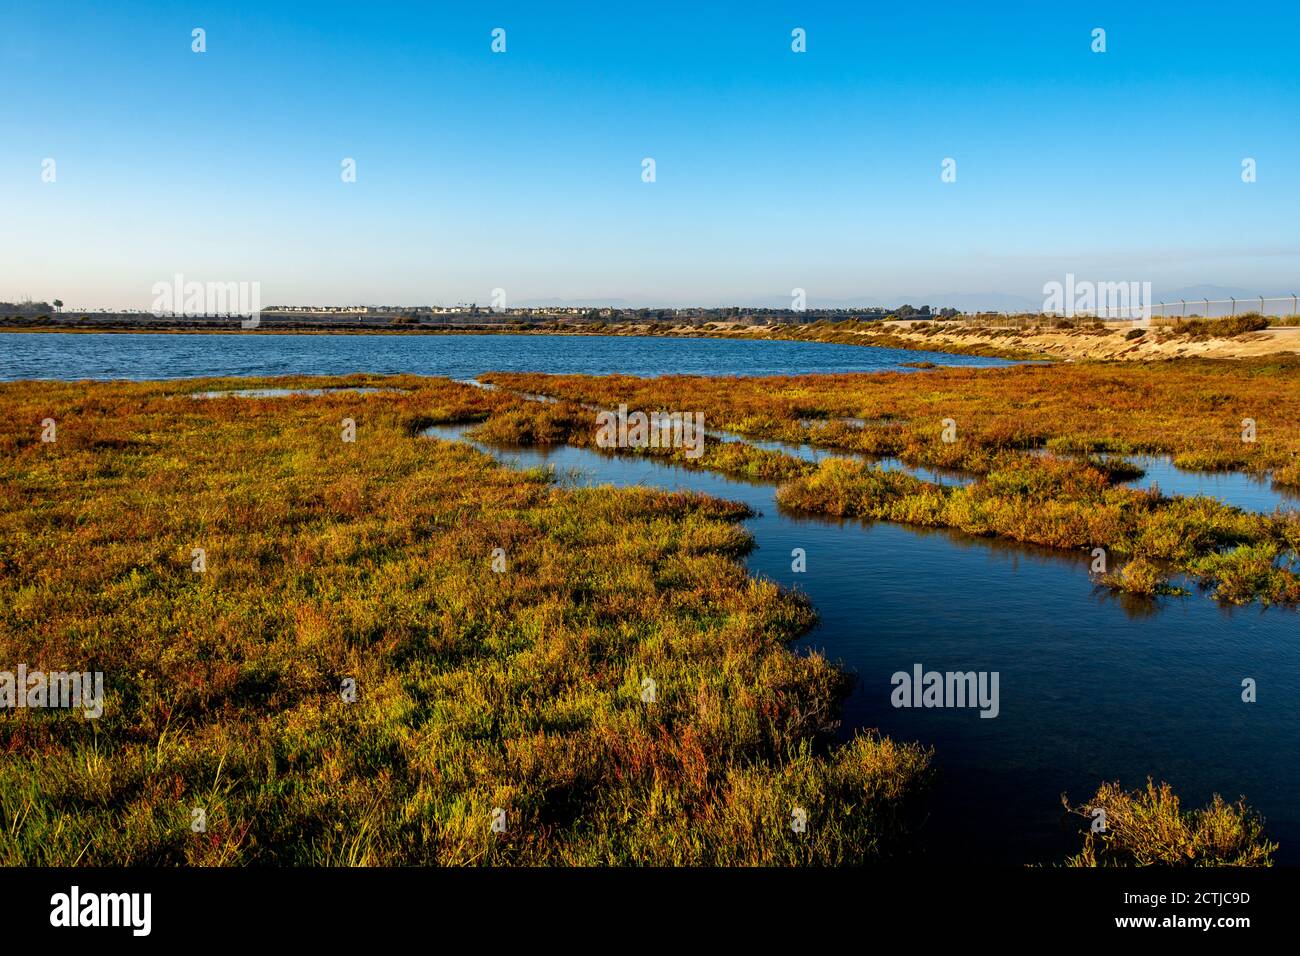 Coastal wetlands, known as the Inner Bolsa Bay, taken from the footbridge at the Bolsa Chica Ecological Reserve, a bird sanctuary, on the first day of Stock Photo